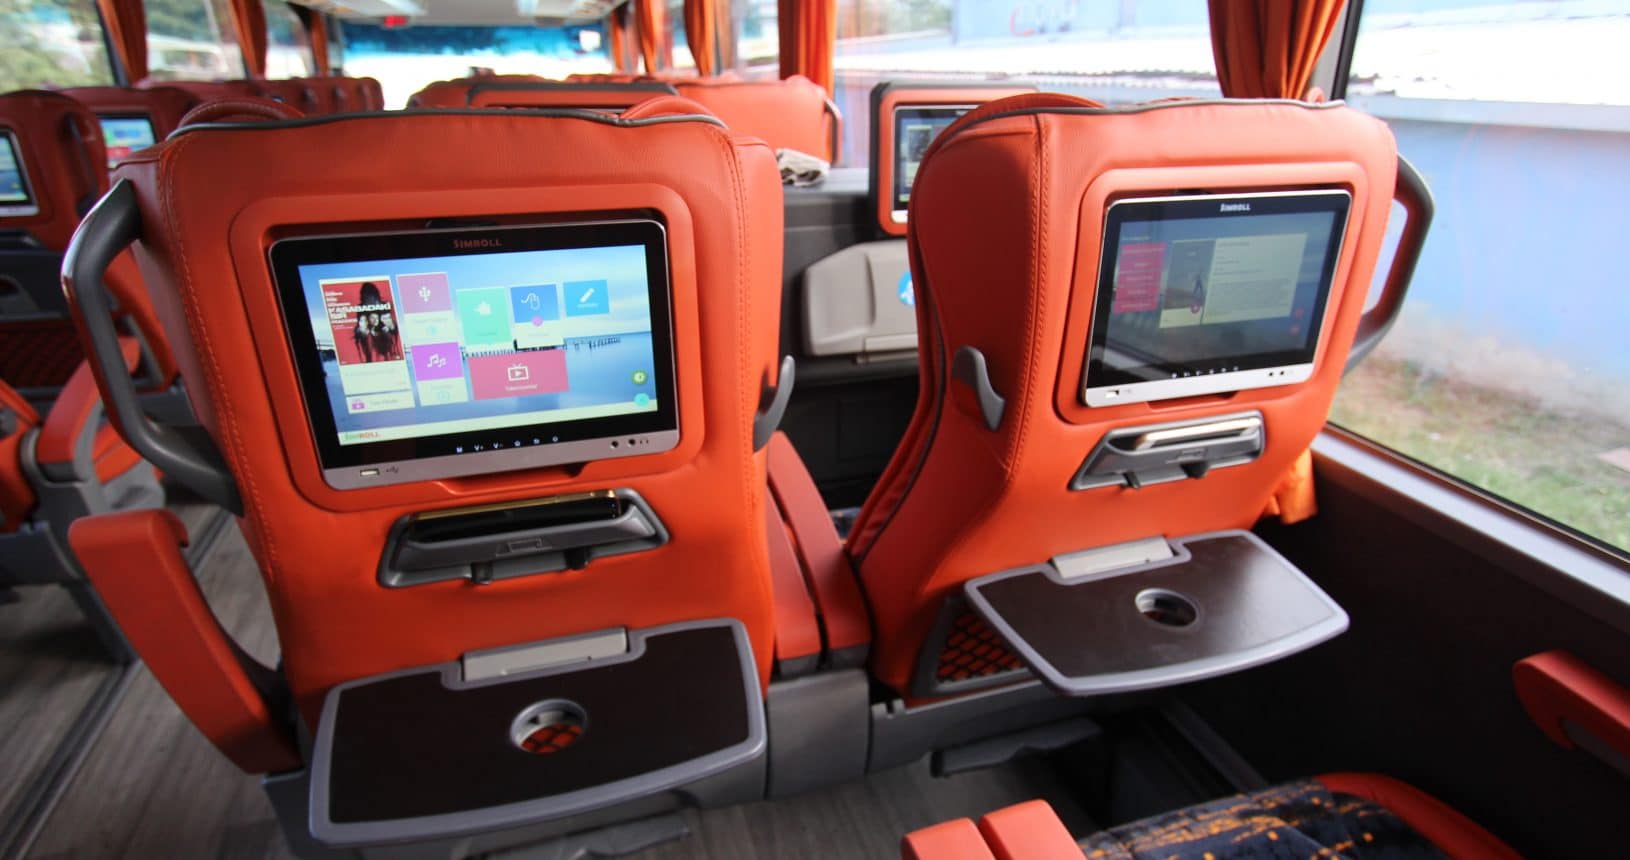 Turkish Bus TV screens and in bus entertainment